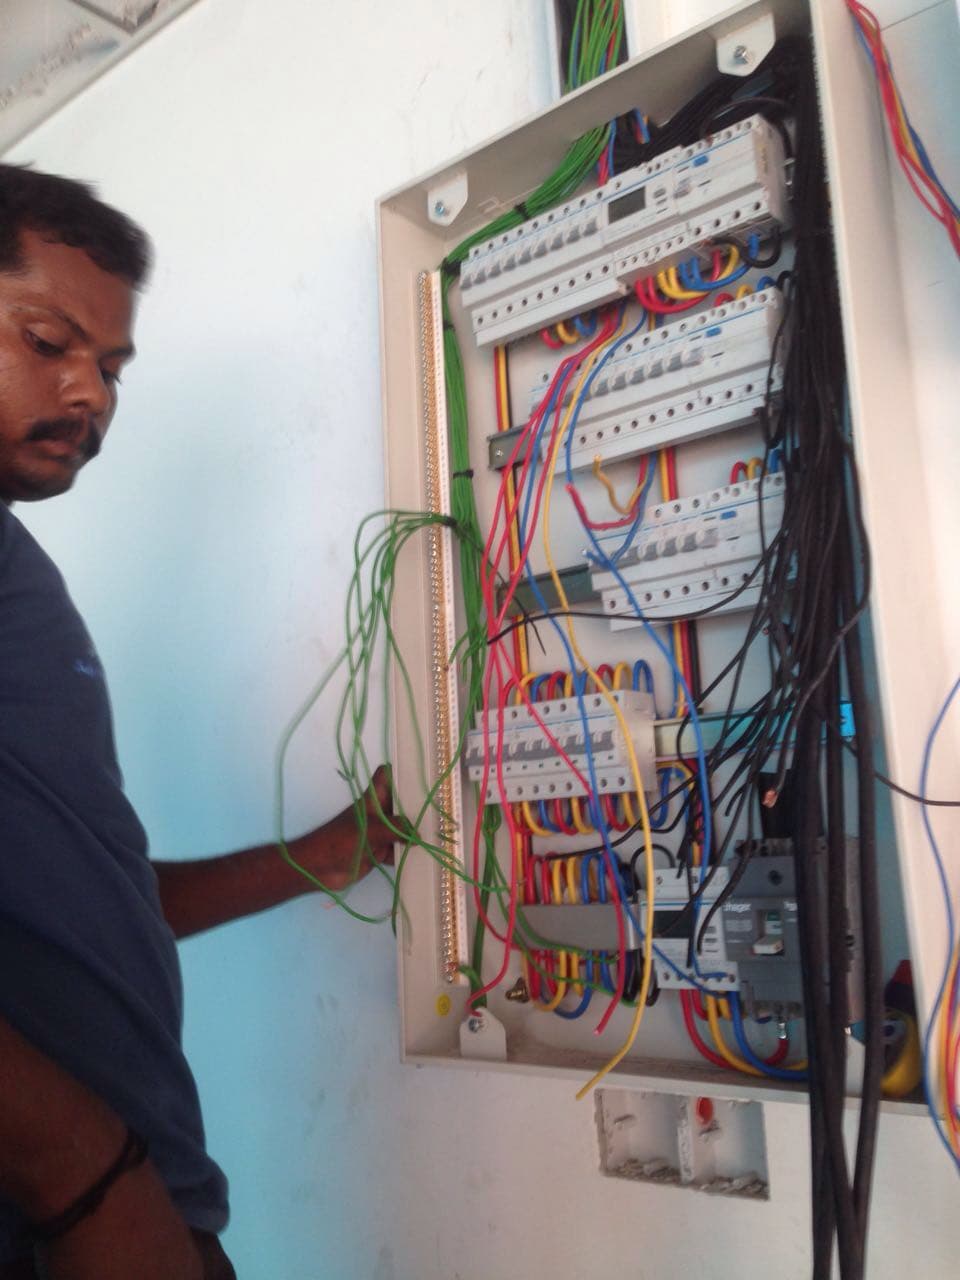 electrical engineering service